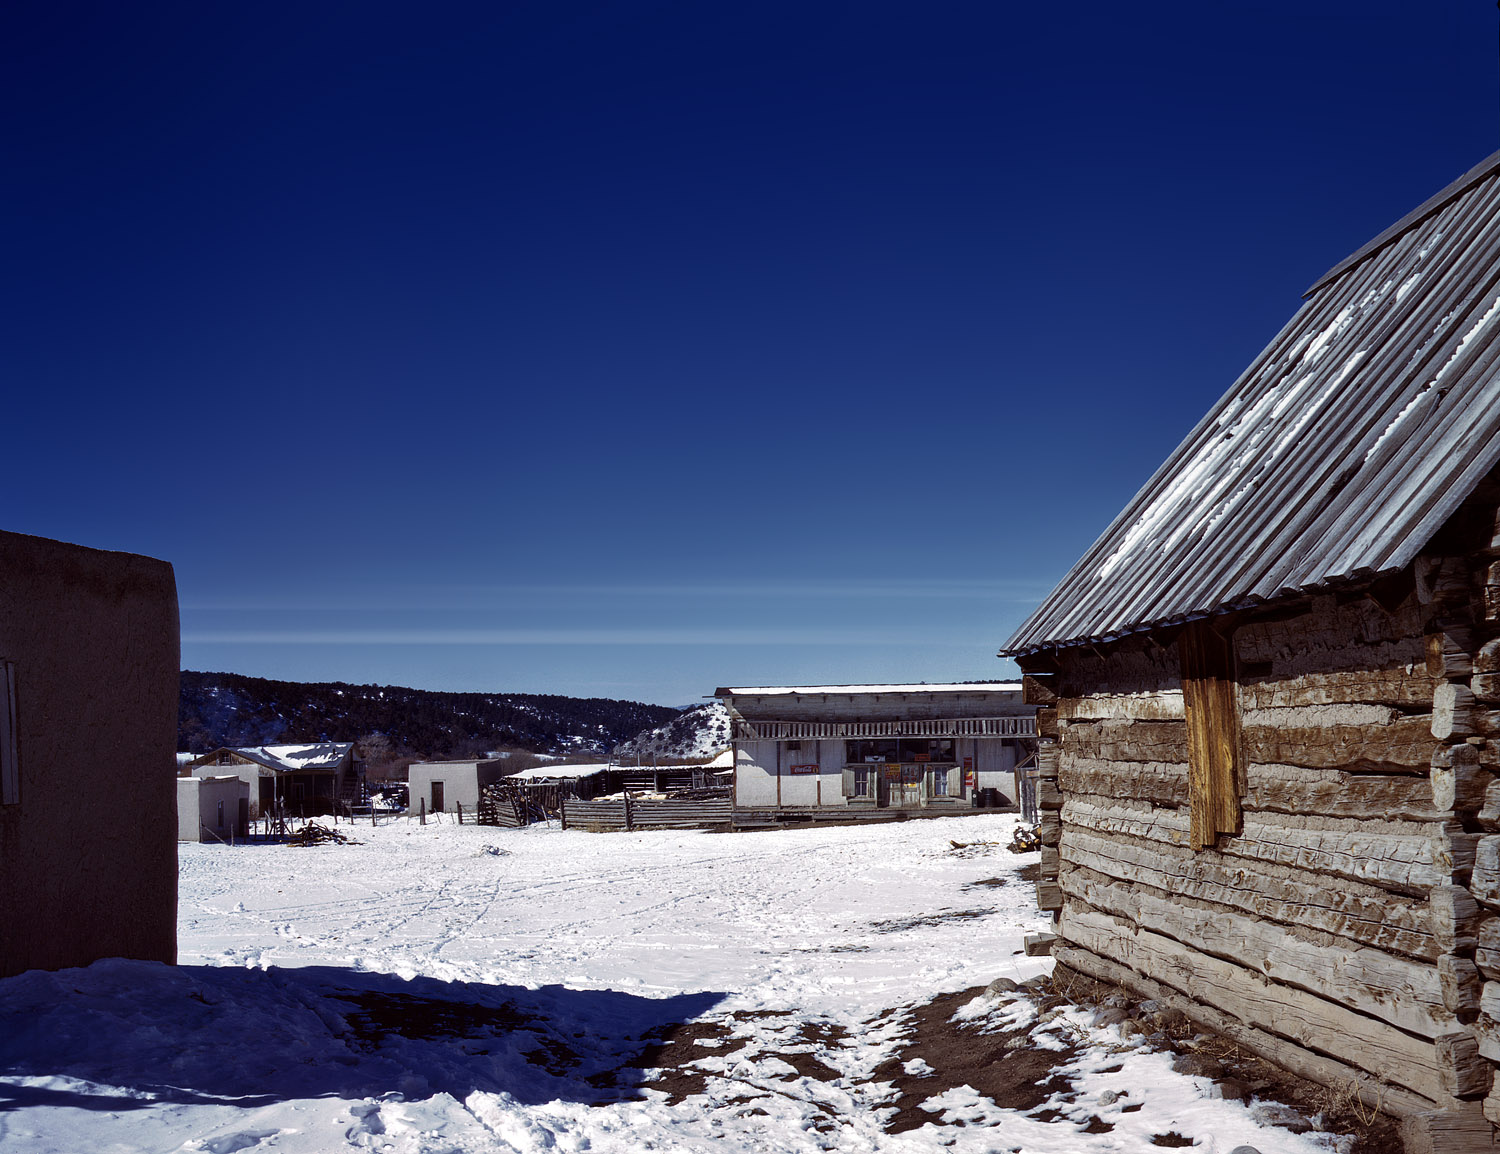 January 1943. Store and plaza in the village of Trampas, Taos County, New Mexico. View full size. 4x5 Kodachrome transparency by John Collier.